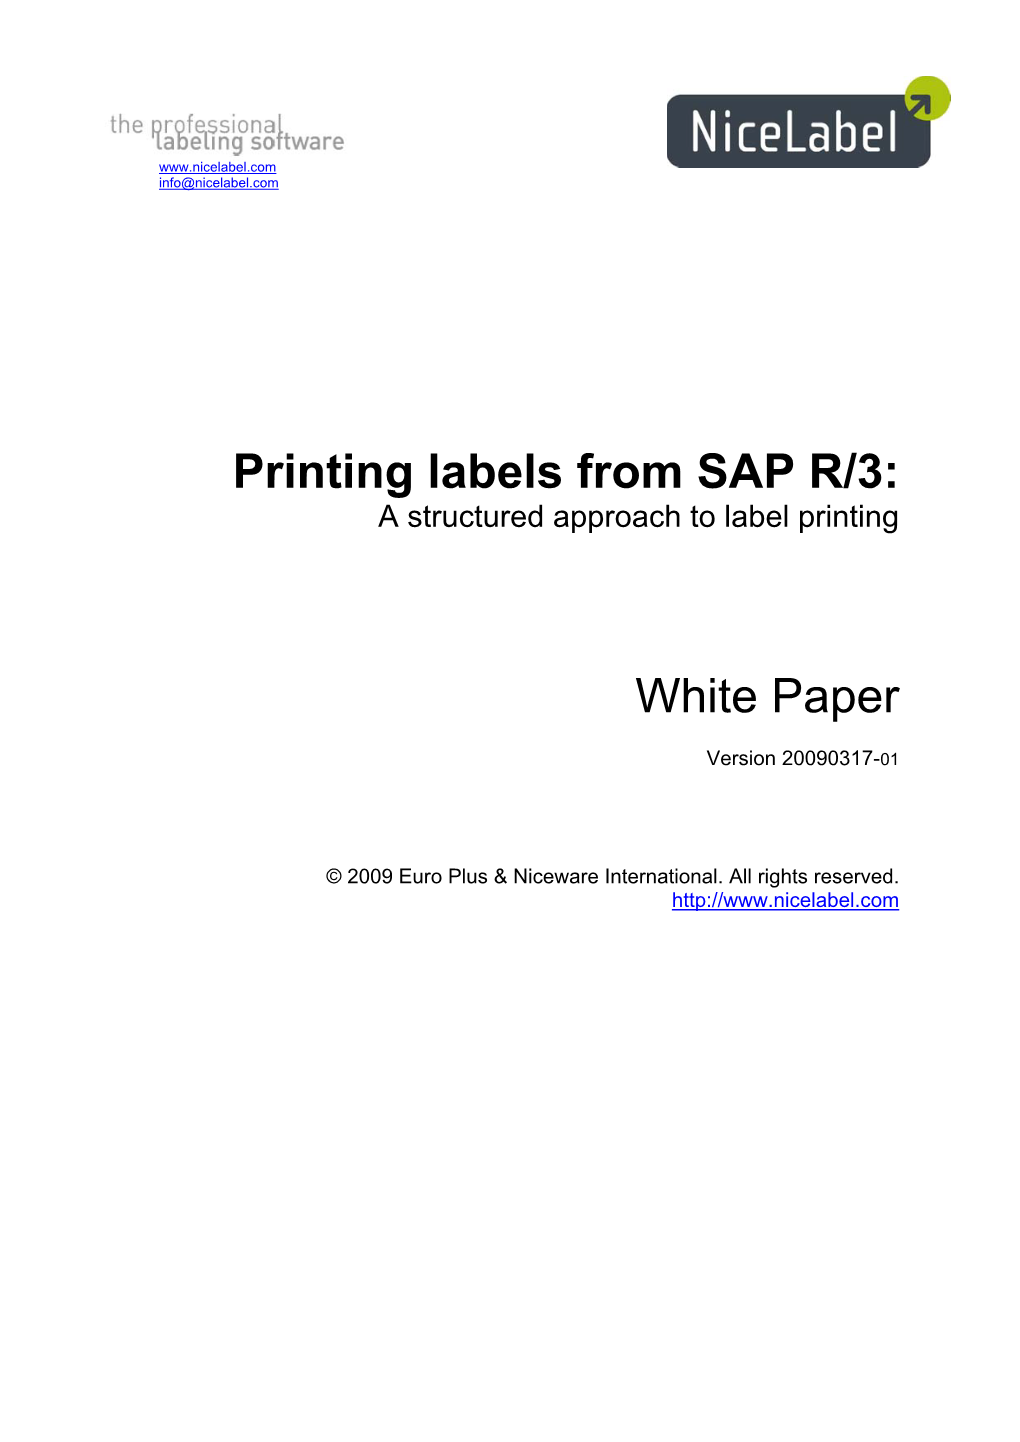 Printing Labels from SAP R/3: a Structured Approach to Label Printing